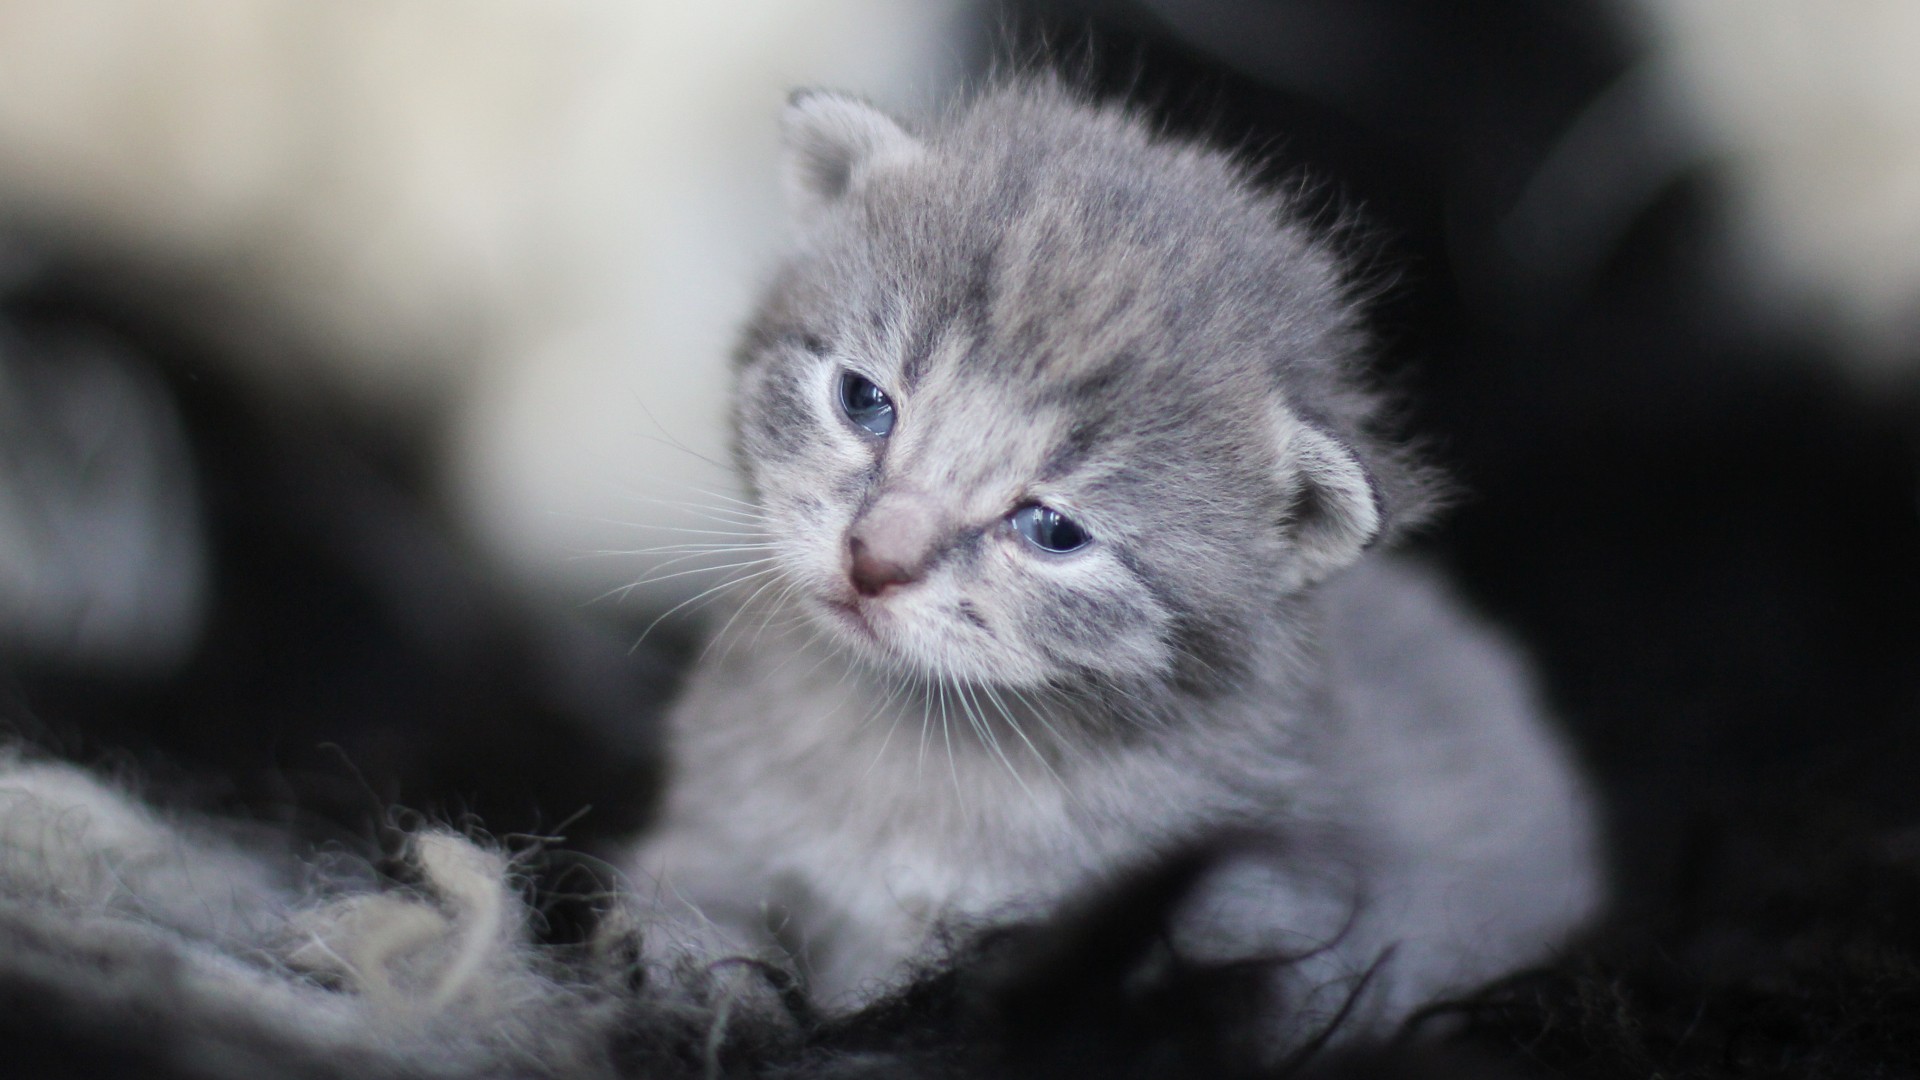 General 1920x1080 baby animals kittens cats